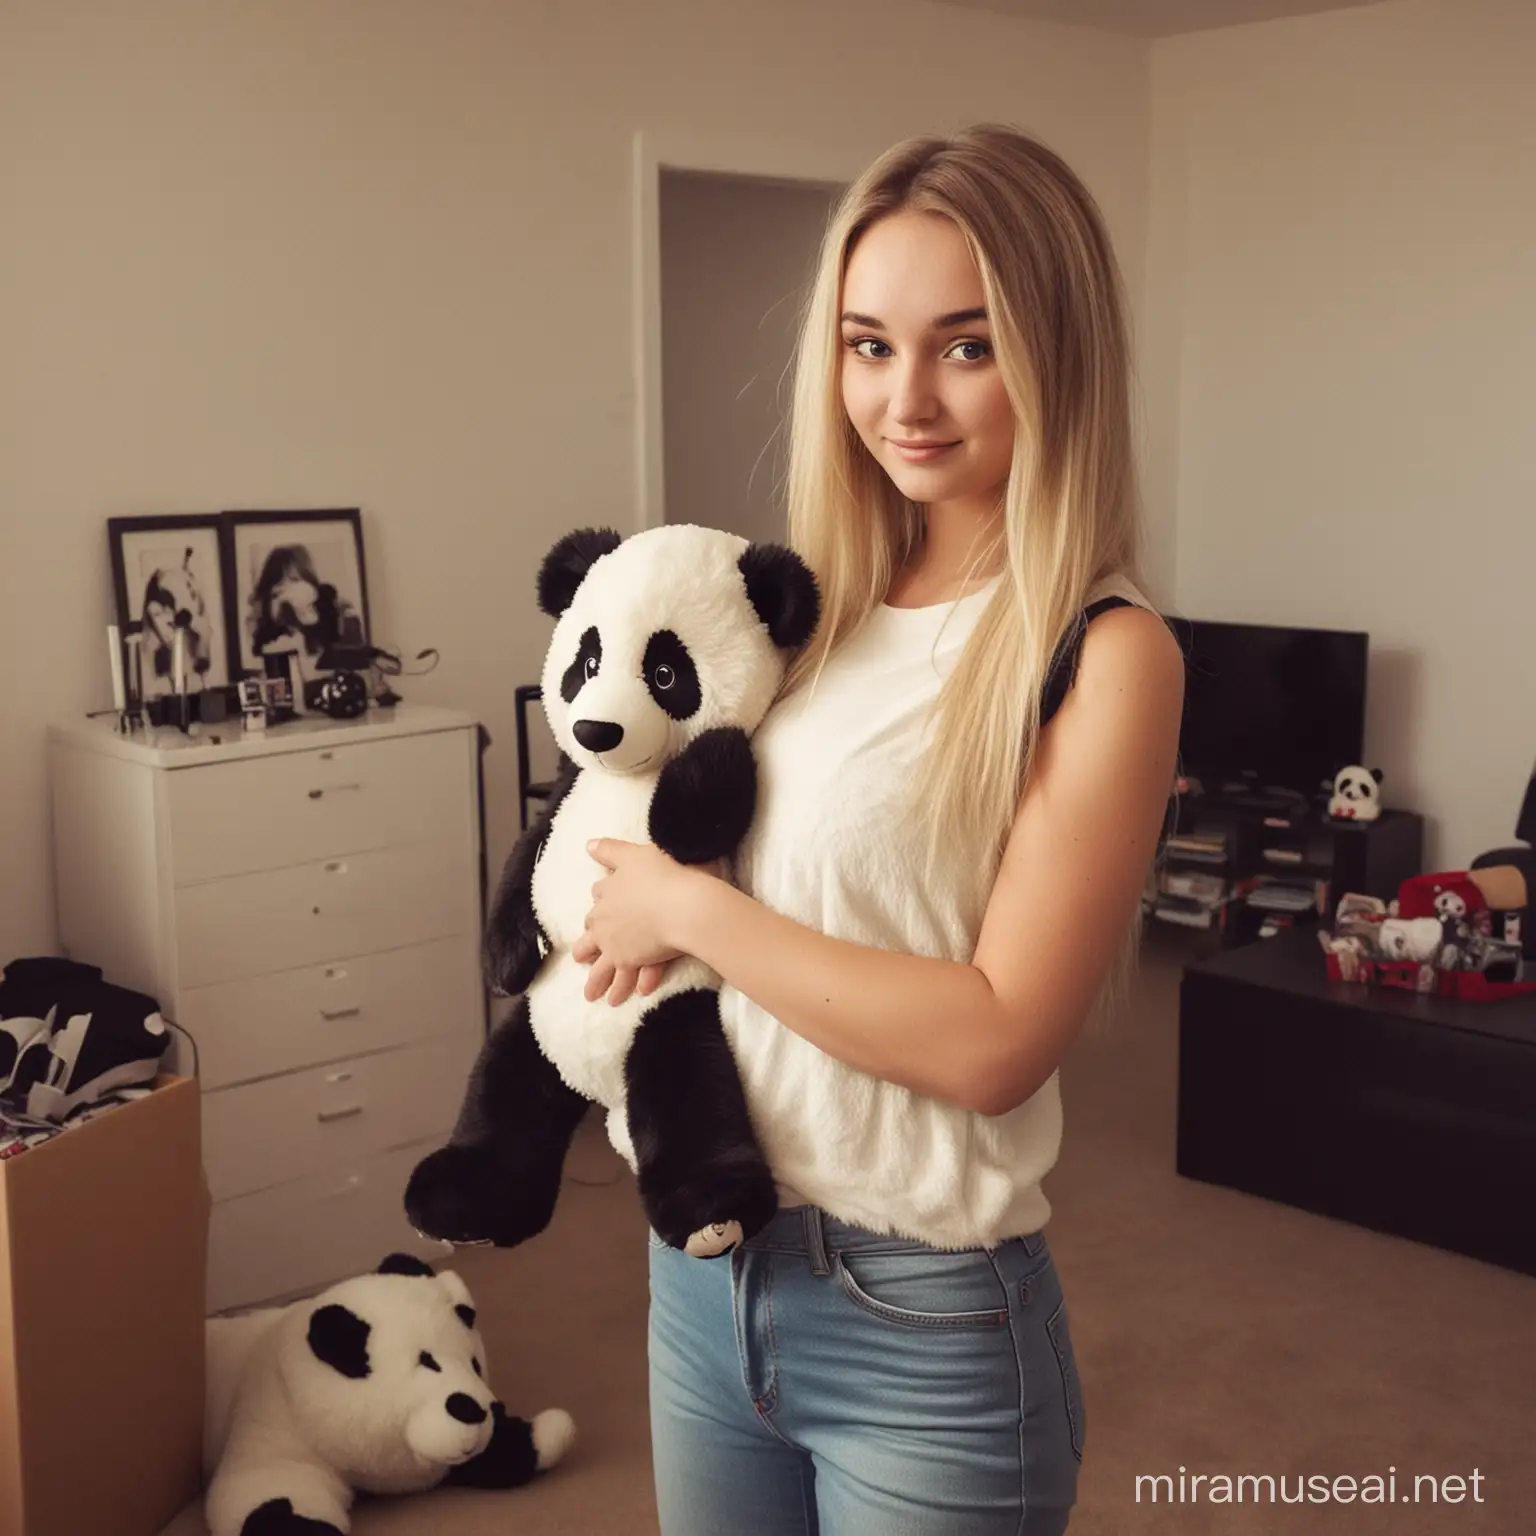 Young Woman Holding Bomb with Giant Stuffed Panda in Apartment